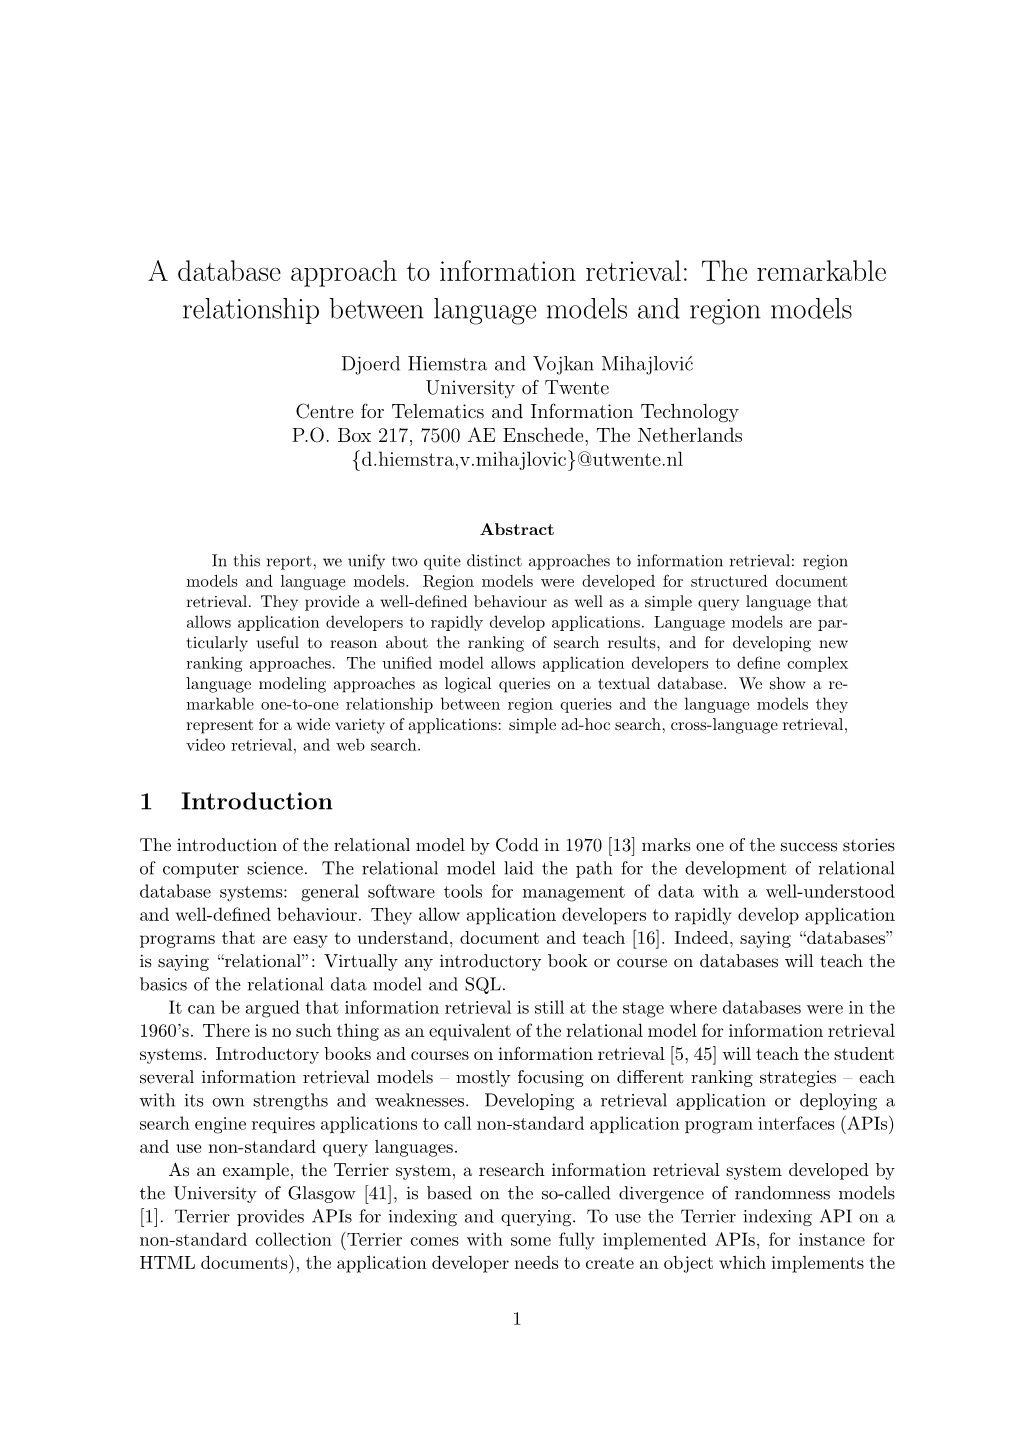 A Database Approach to Information Retrieval: the Remarkable Relationship Between Language Models and Region Models